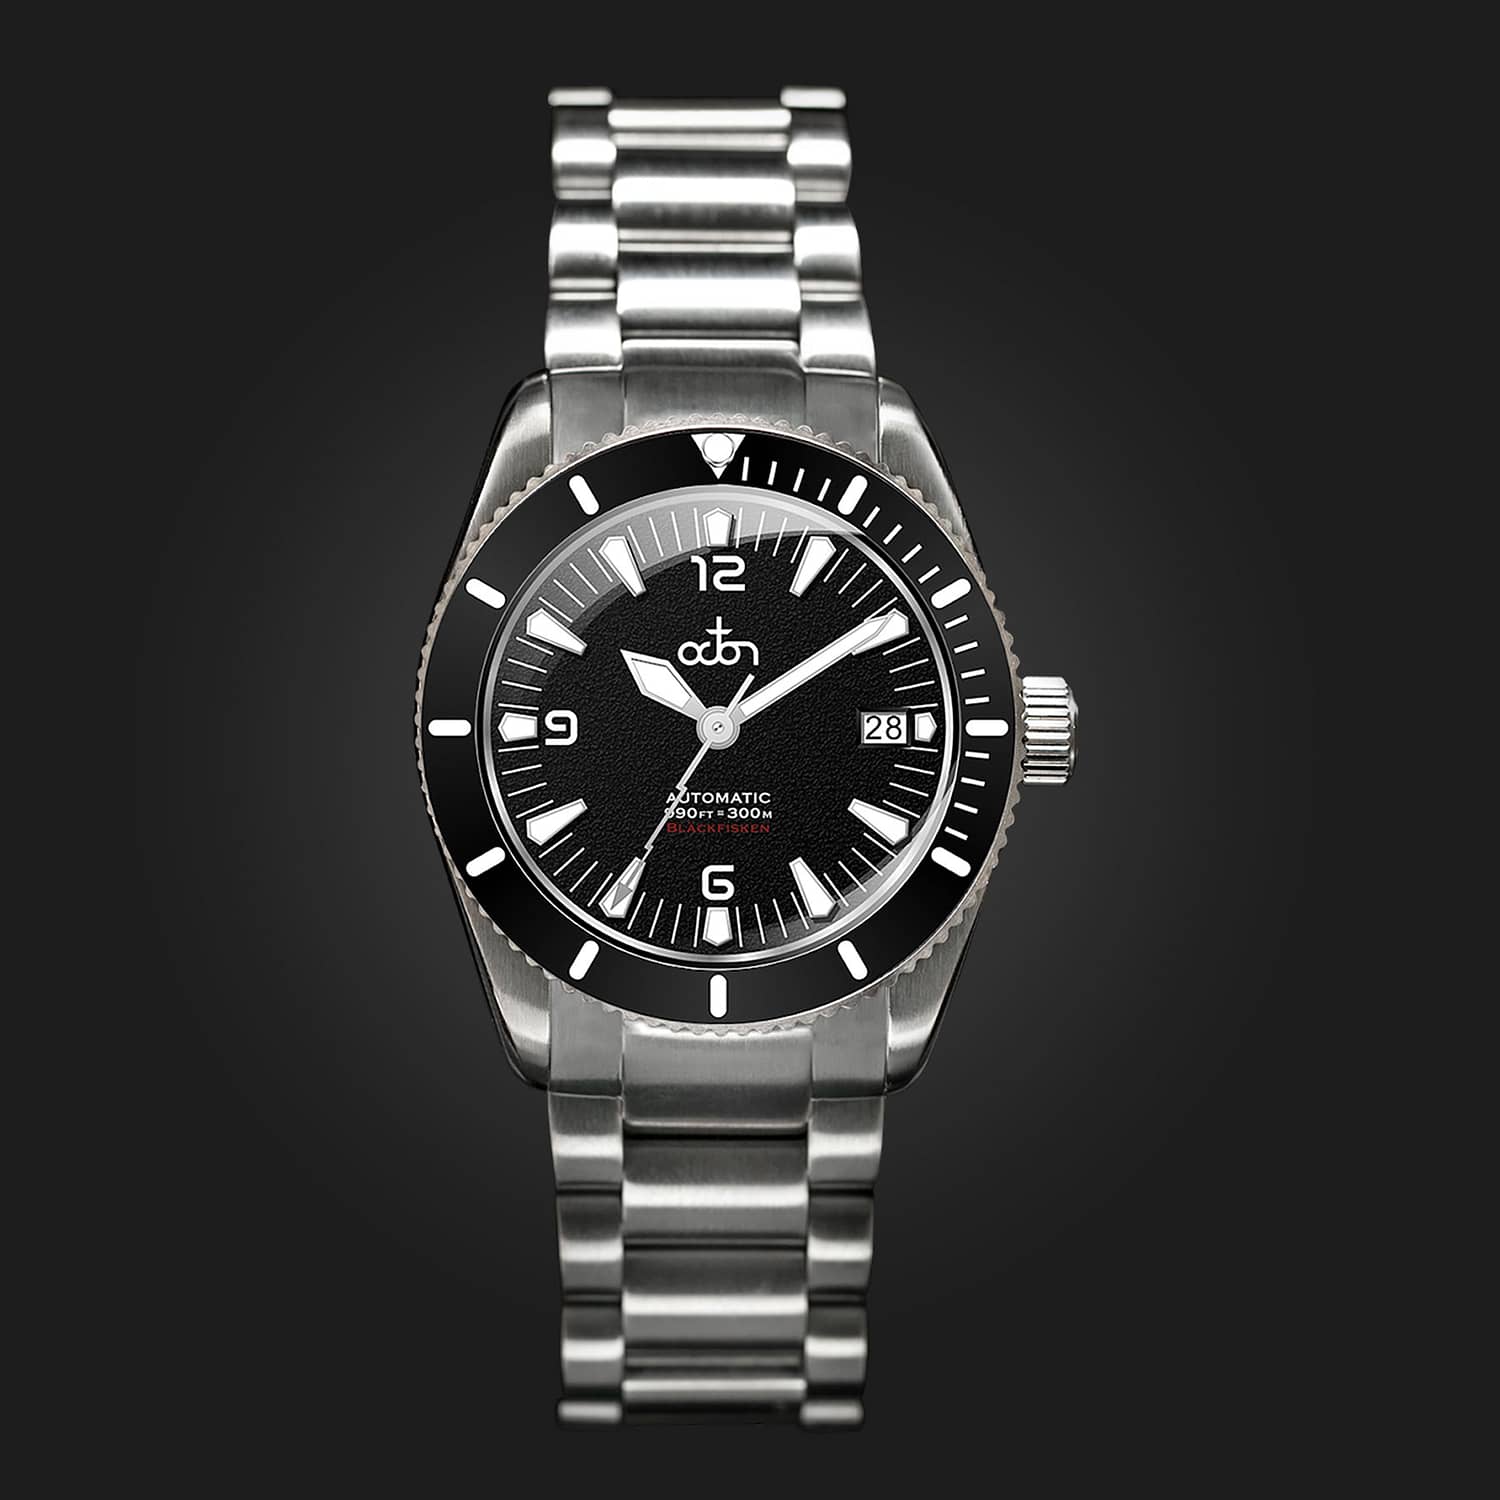 Bläckfisken - Black - Limited Edition Watch (300 pieces) with Stainless Steel Bracelet.